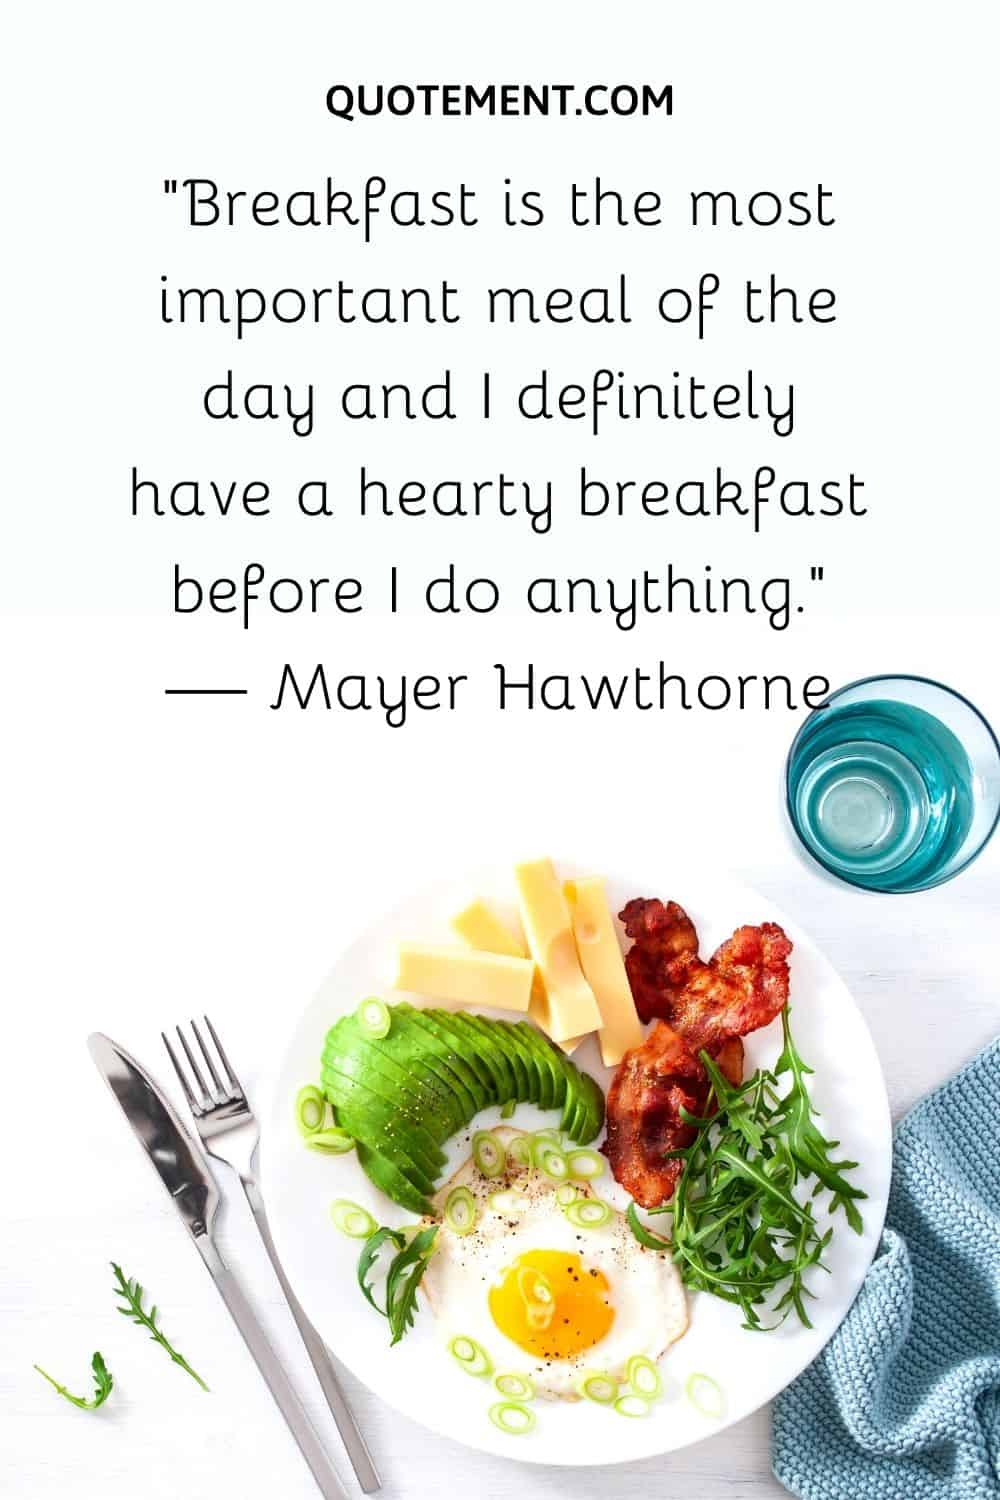 “Breakfast is the most important meal of the day and I definitely have a hearty breakfast before I do anything.” — Mayer Hawthorne